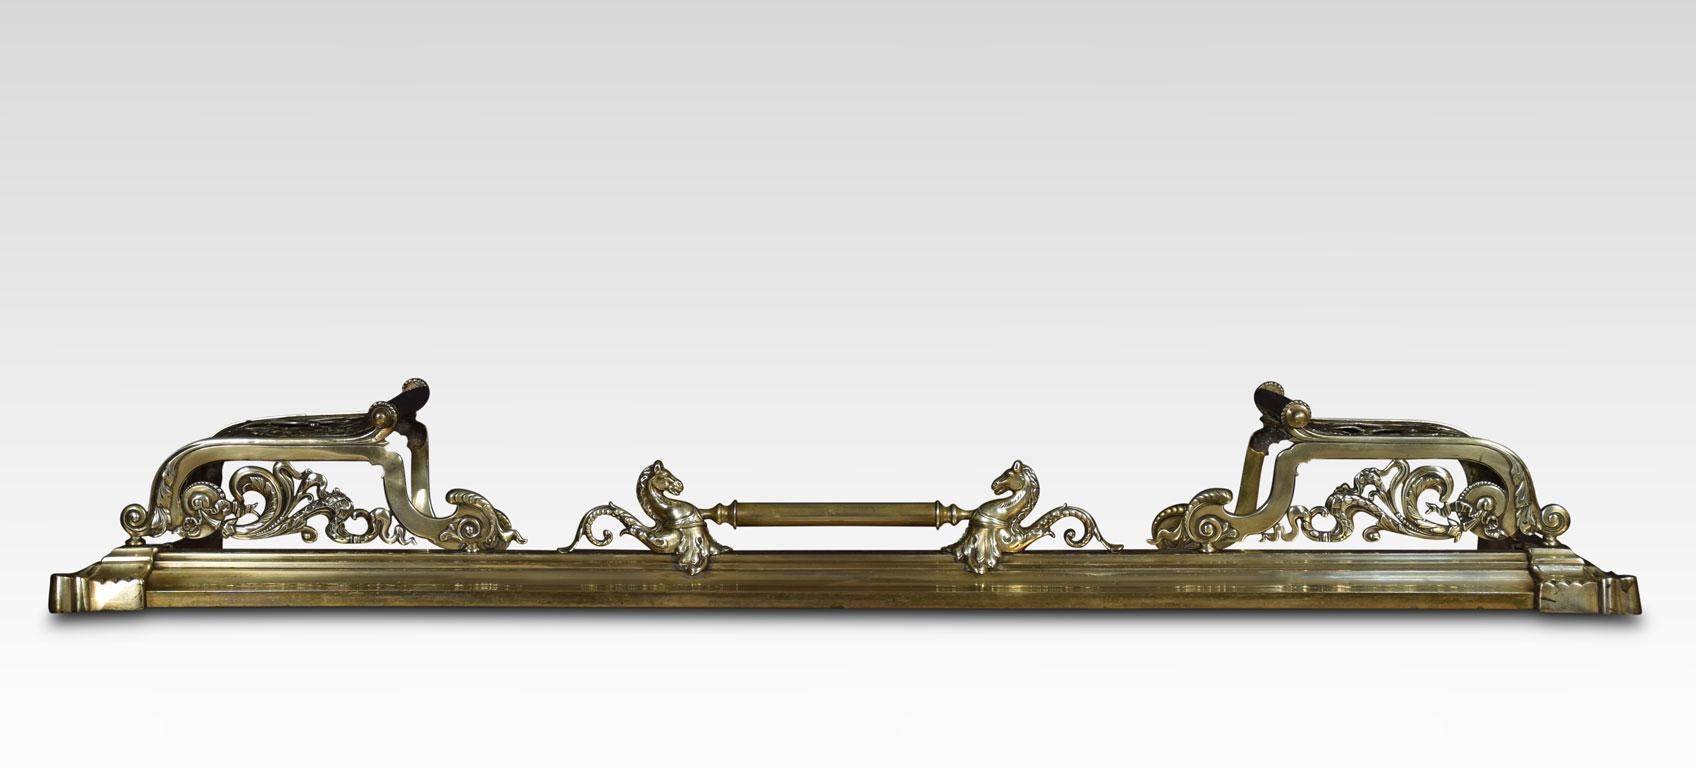 19th century brass fender. Having pierced brackets flanking two mythological serpents all raised up on stepped plinth base.
Dimensions
Height 7.5 inches
Length 54 inches
Depth 15 inches.